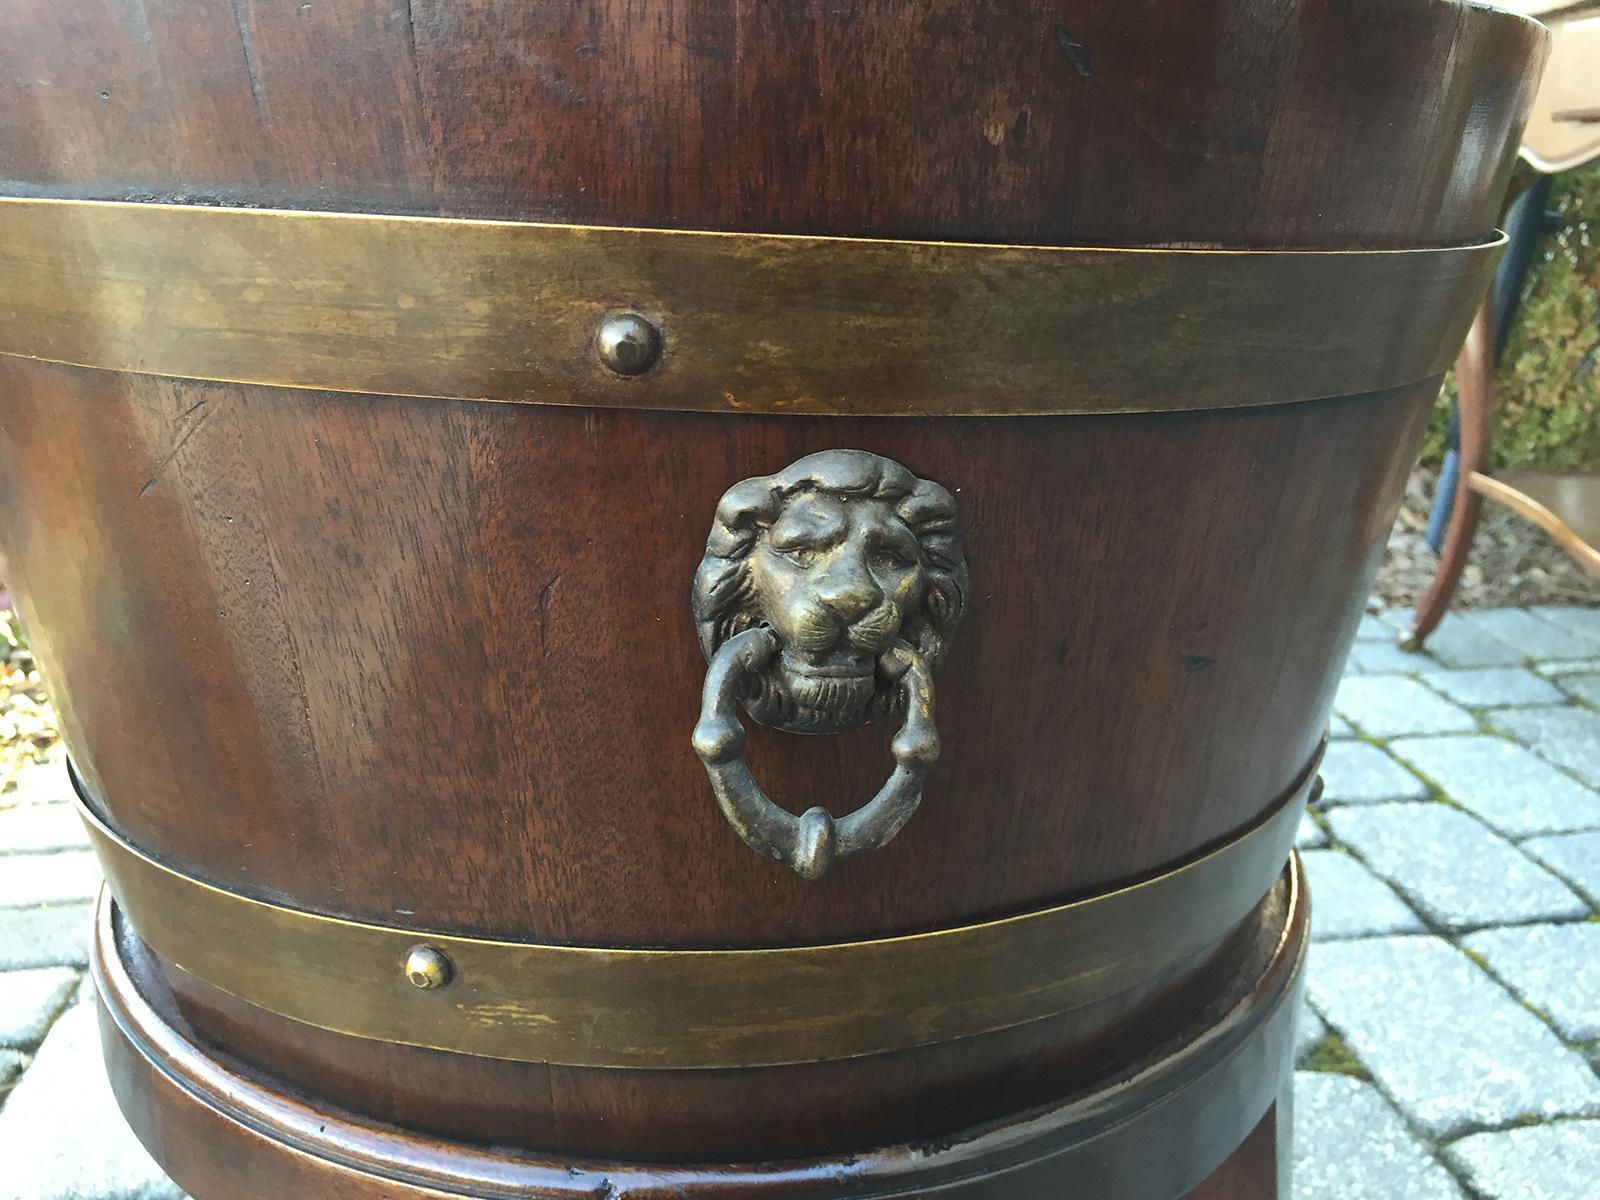 19th century English Campaign style cellarette brass bound bucket on stand with brass lion pulls.